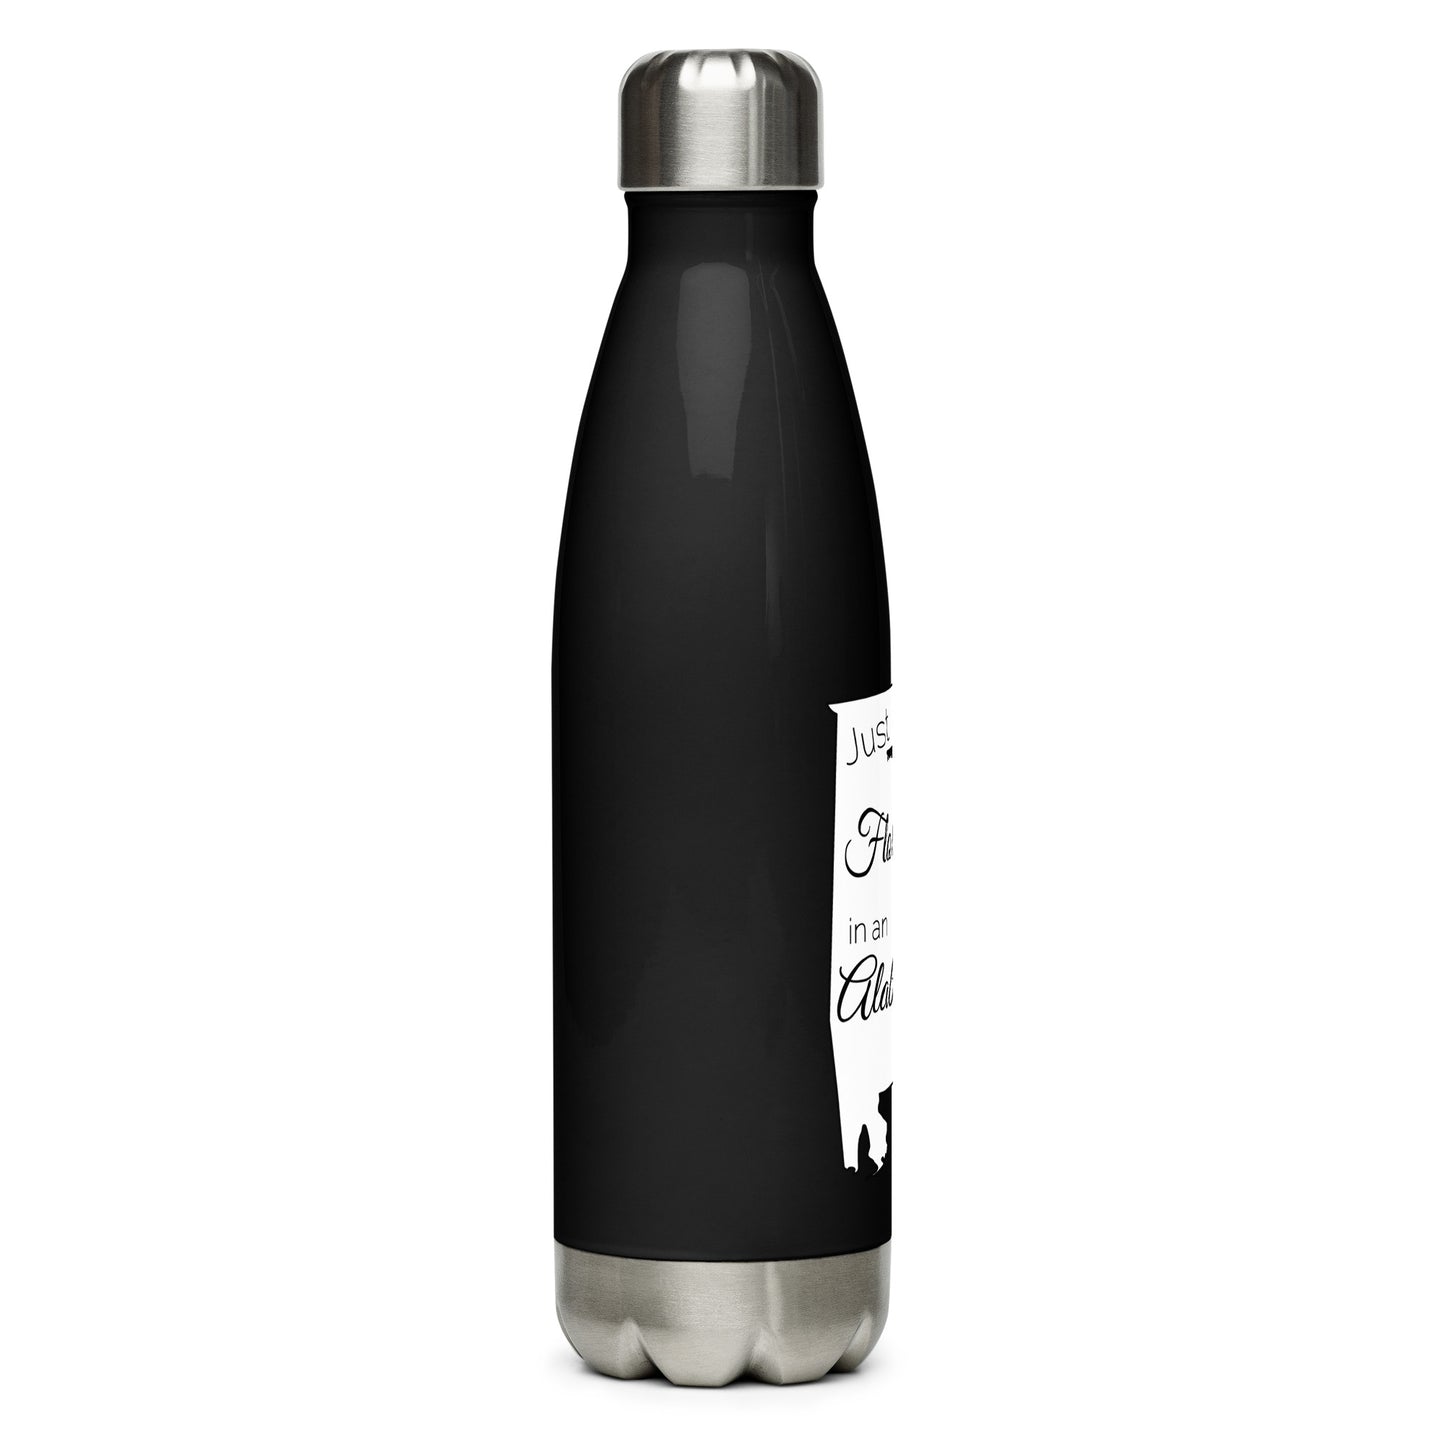 Just a Florida Girl in an Alabama World Stainless Steel Water Bottle